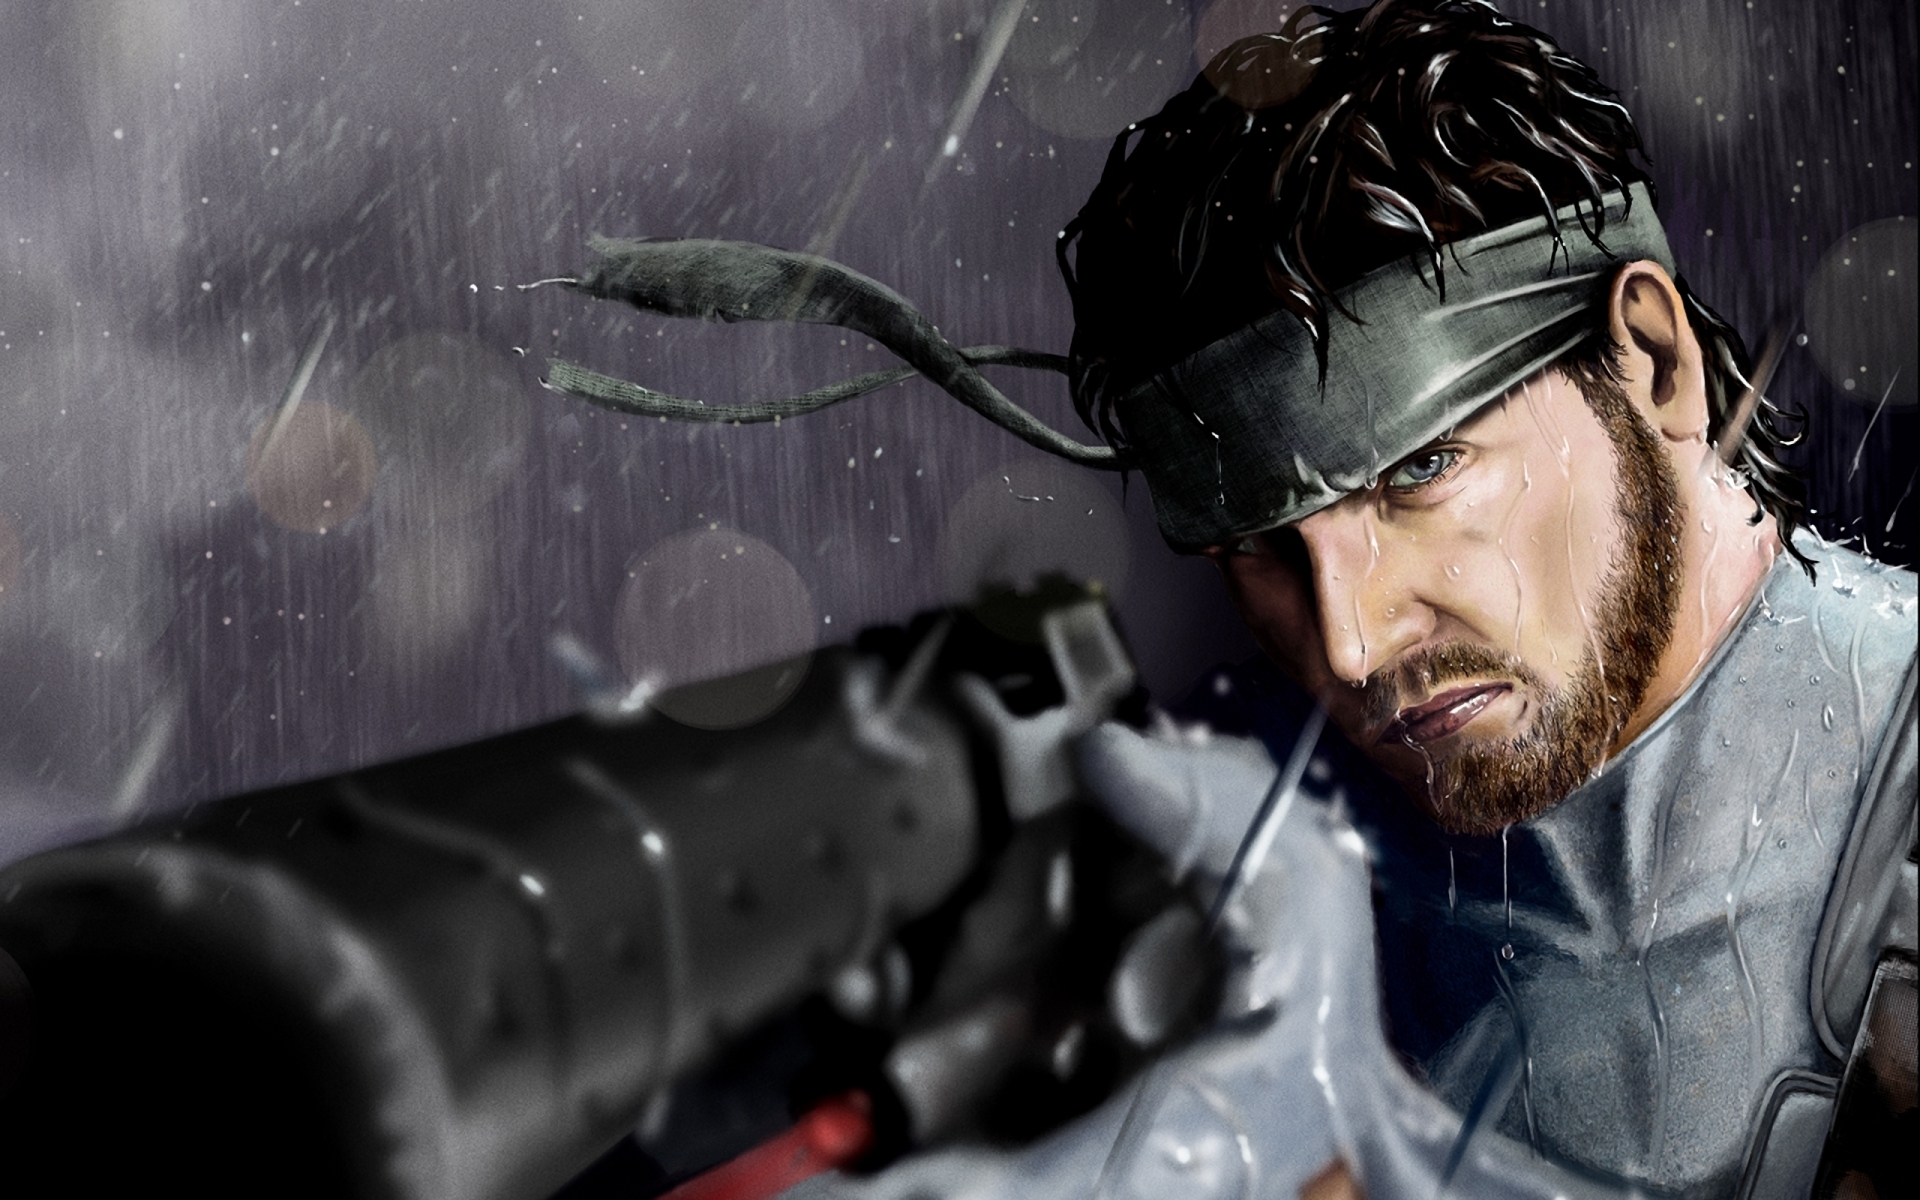 metal gear solid iphone wallpaper,helmet,movie,personal protective equipment,facial hair,action film